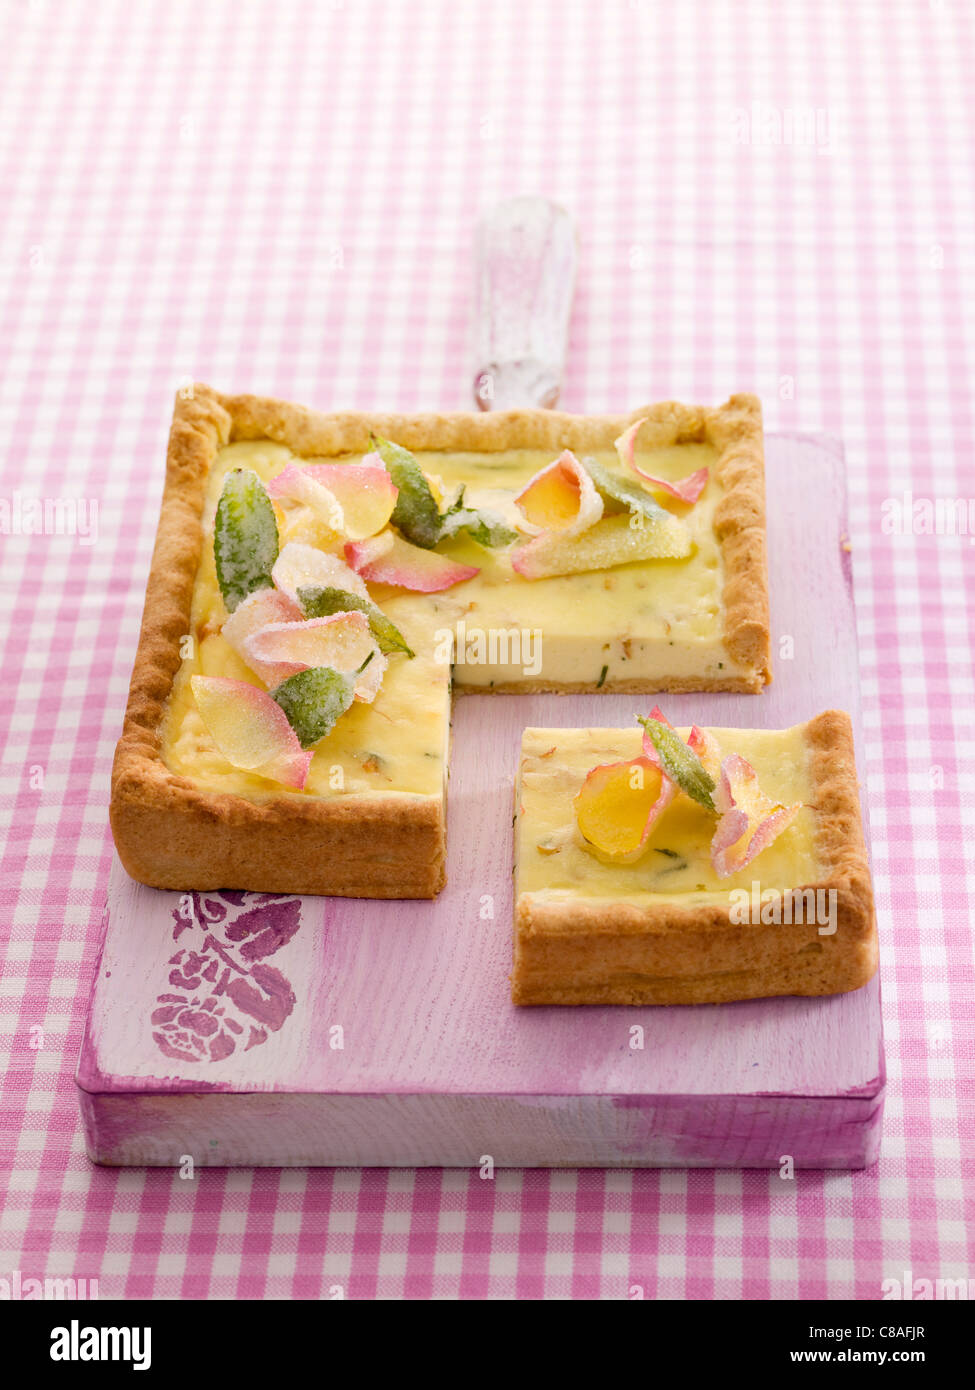 Rose and mint cheesecake Stock Photo